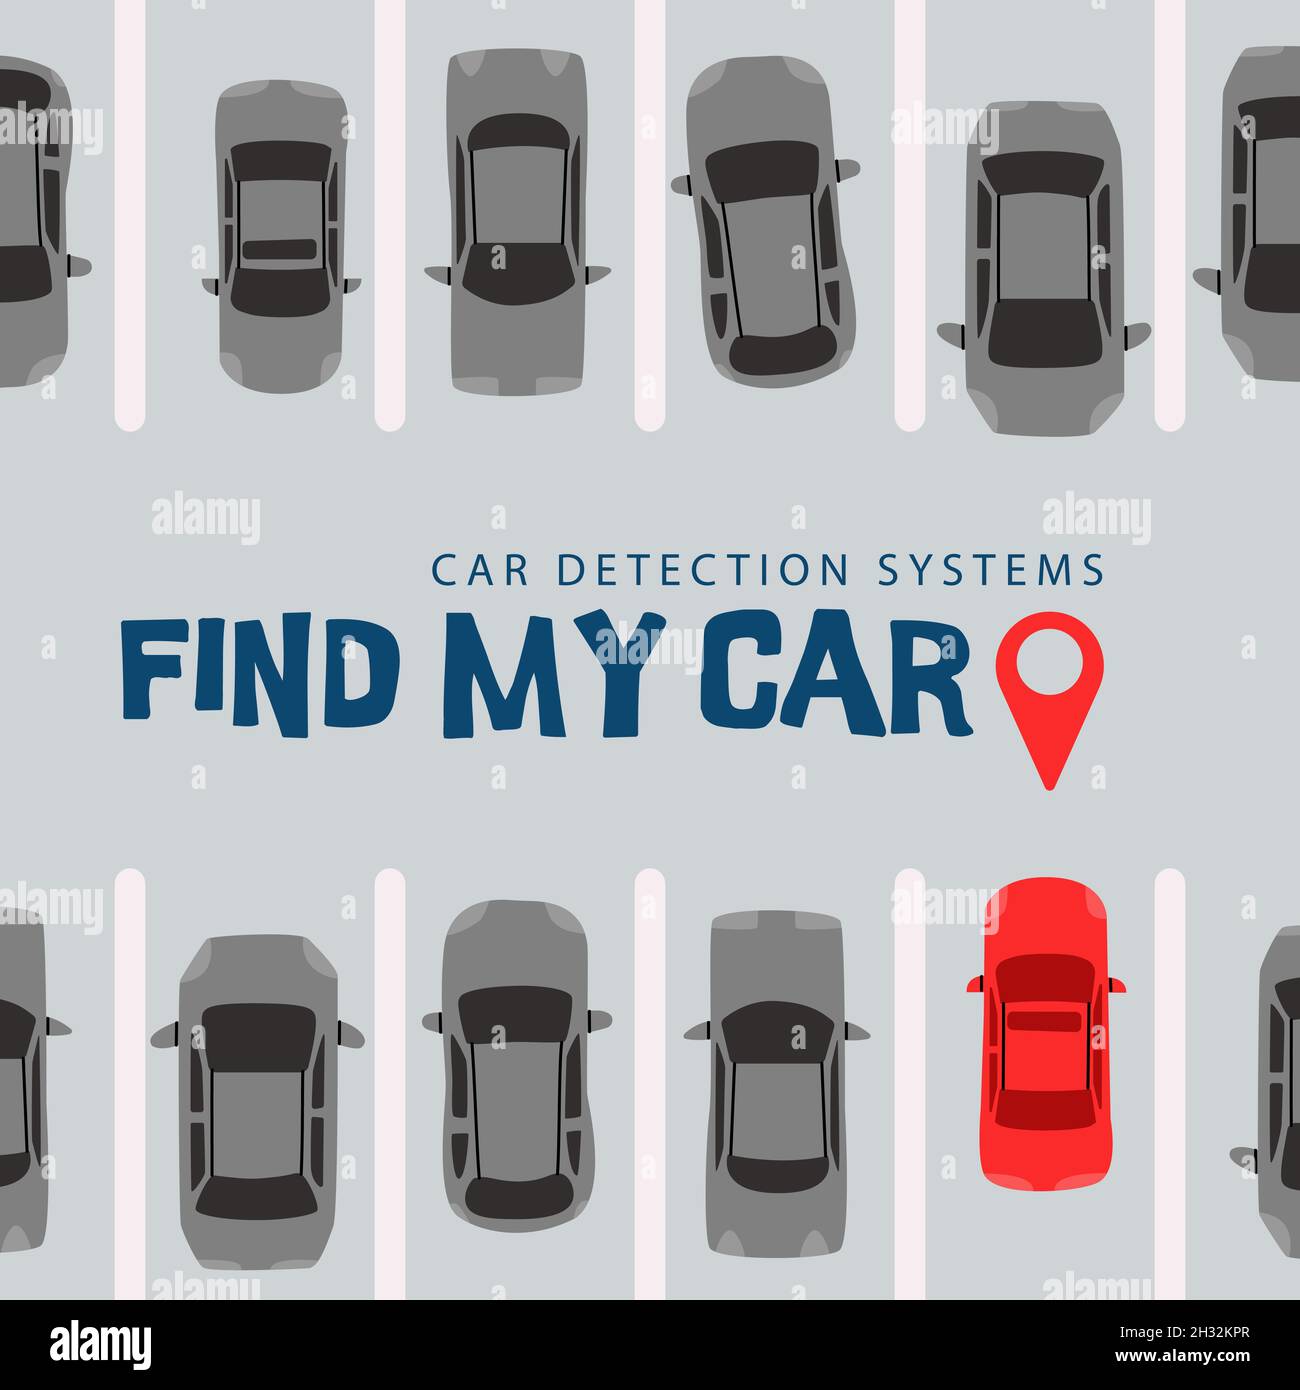 Find my car. Vehicle detection systems. Top view of a parking lot with cars. Geotag pointing to the vehicle. Vector eps 10. Stock Vector